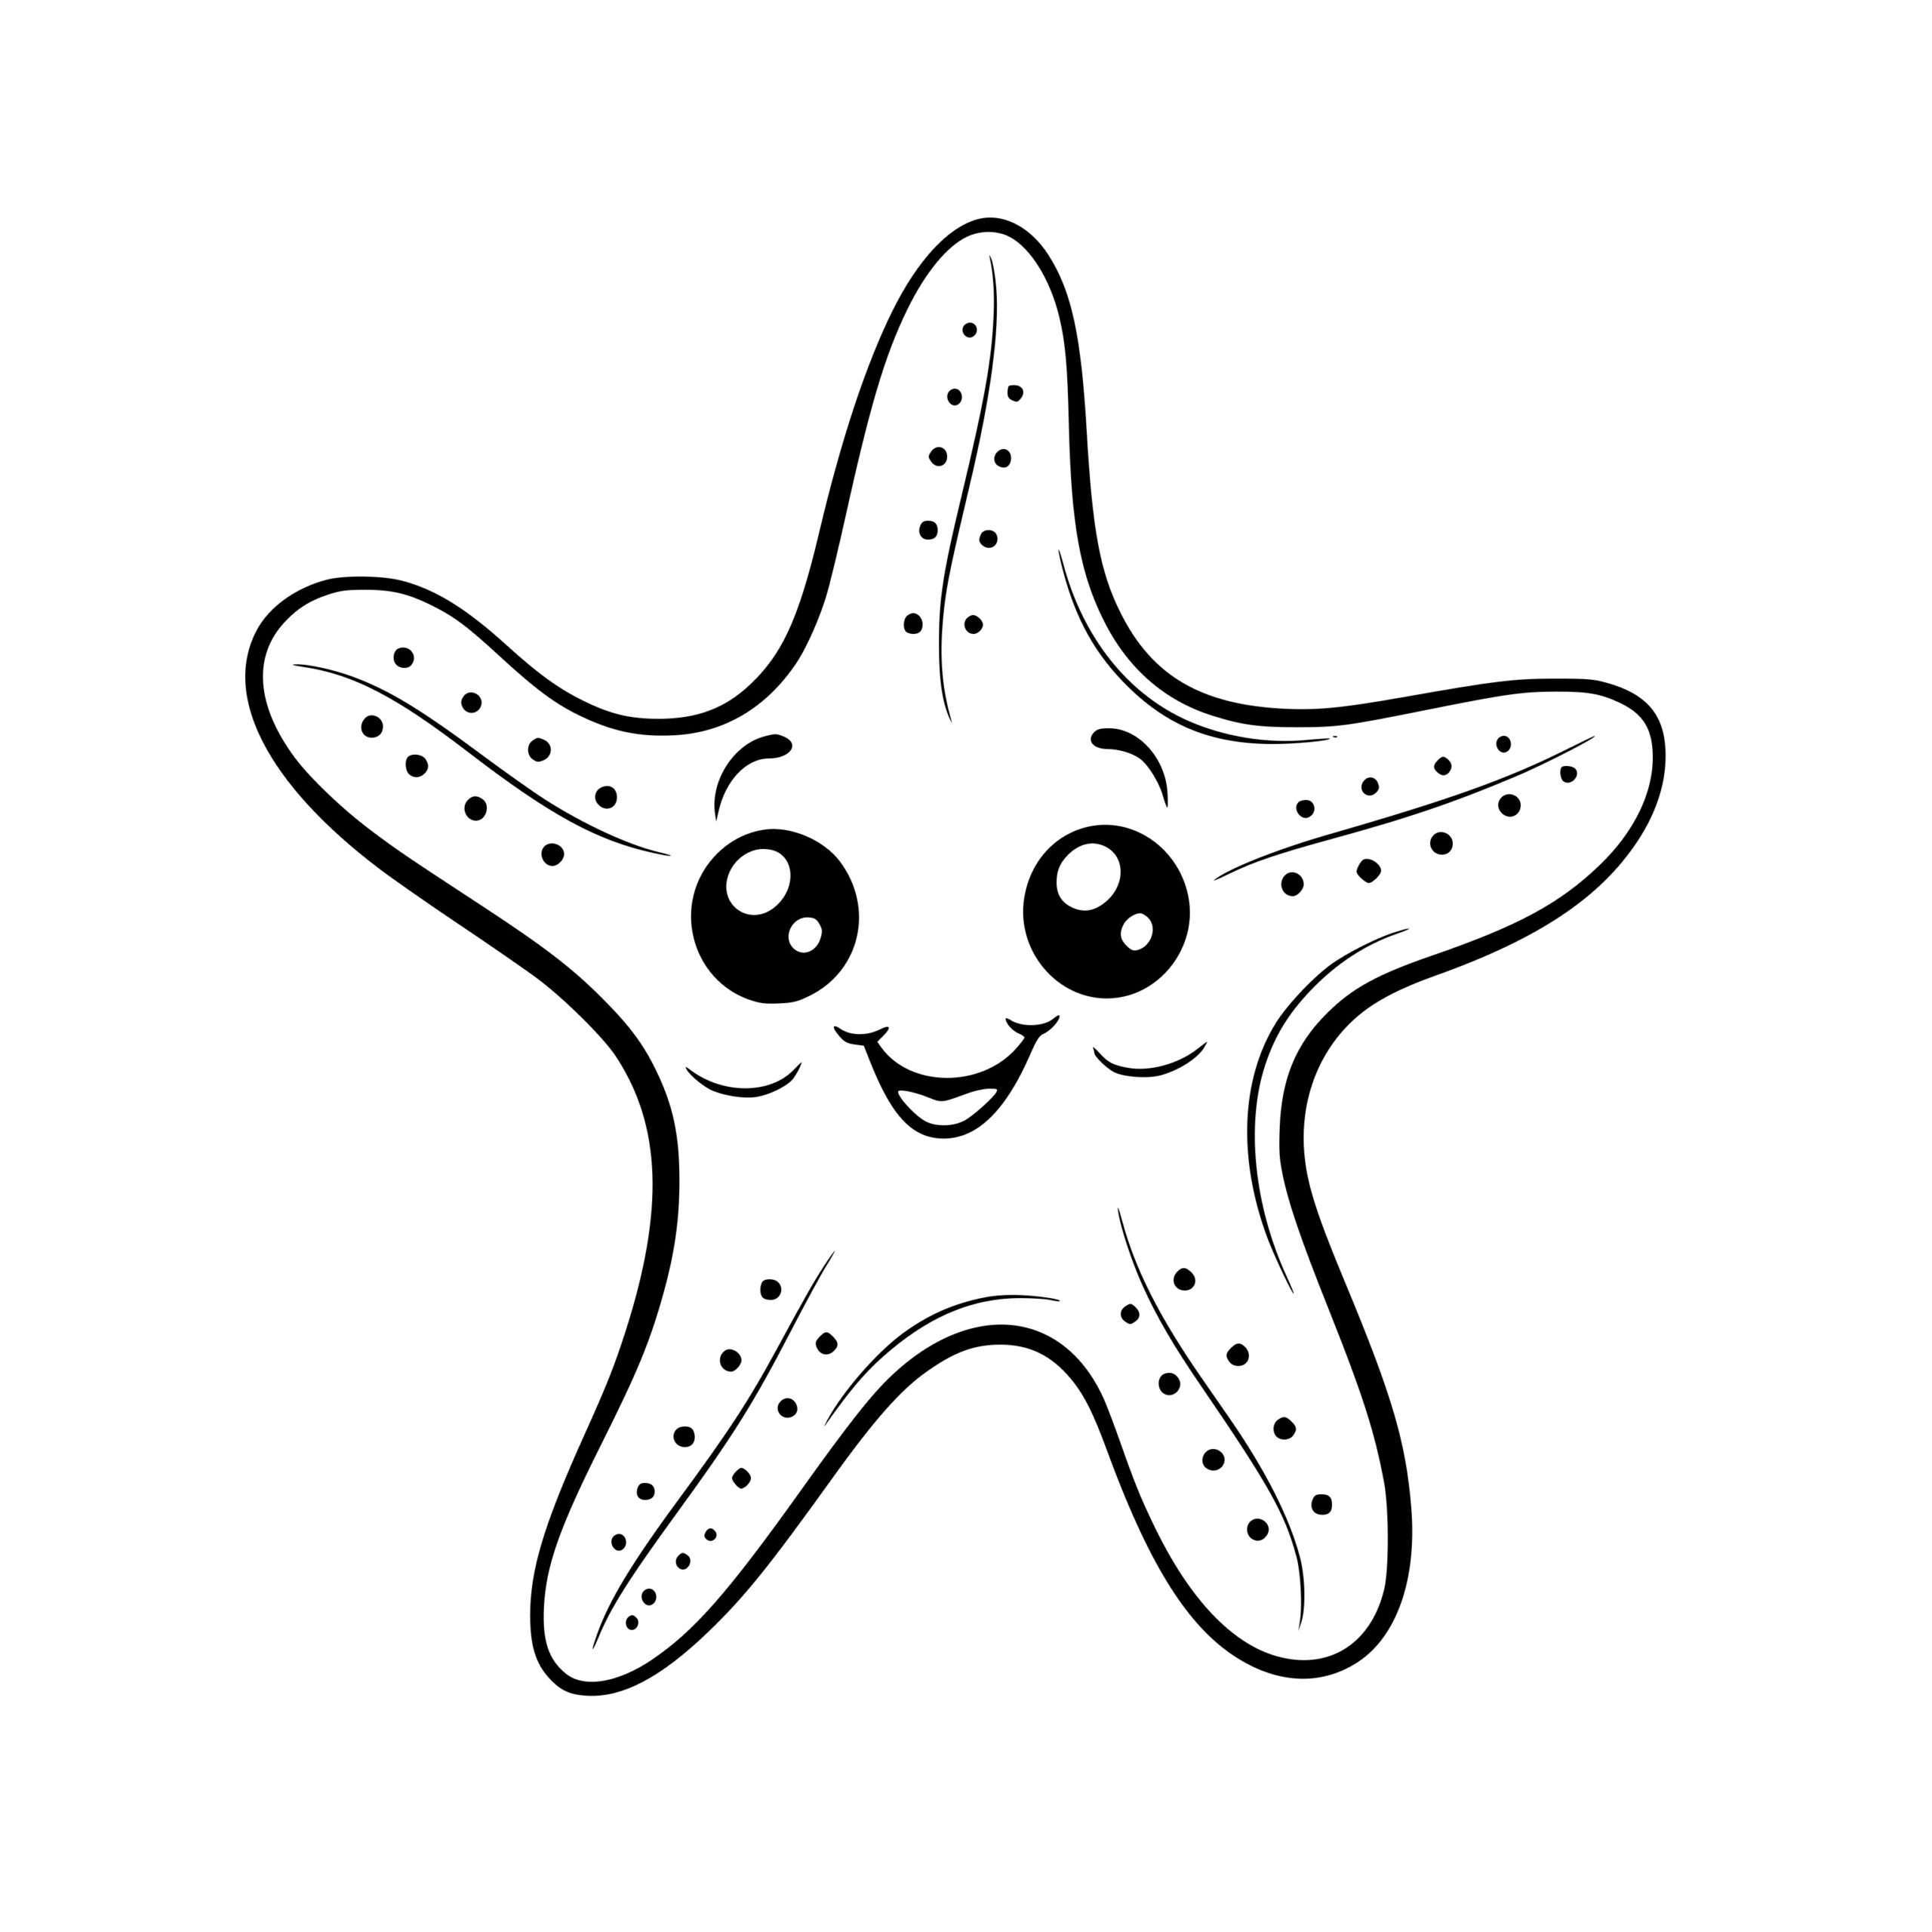 Smiling Starfish SVG File: Instant Download for Cricut, Silhouette, and ...